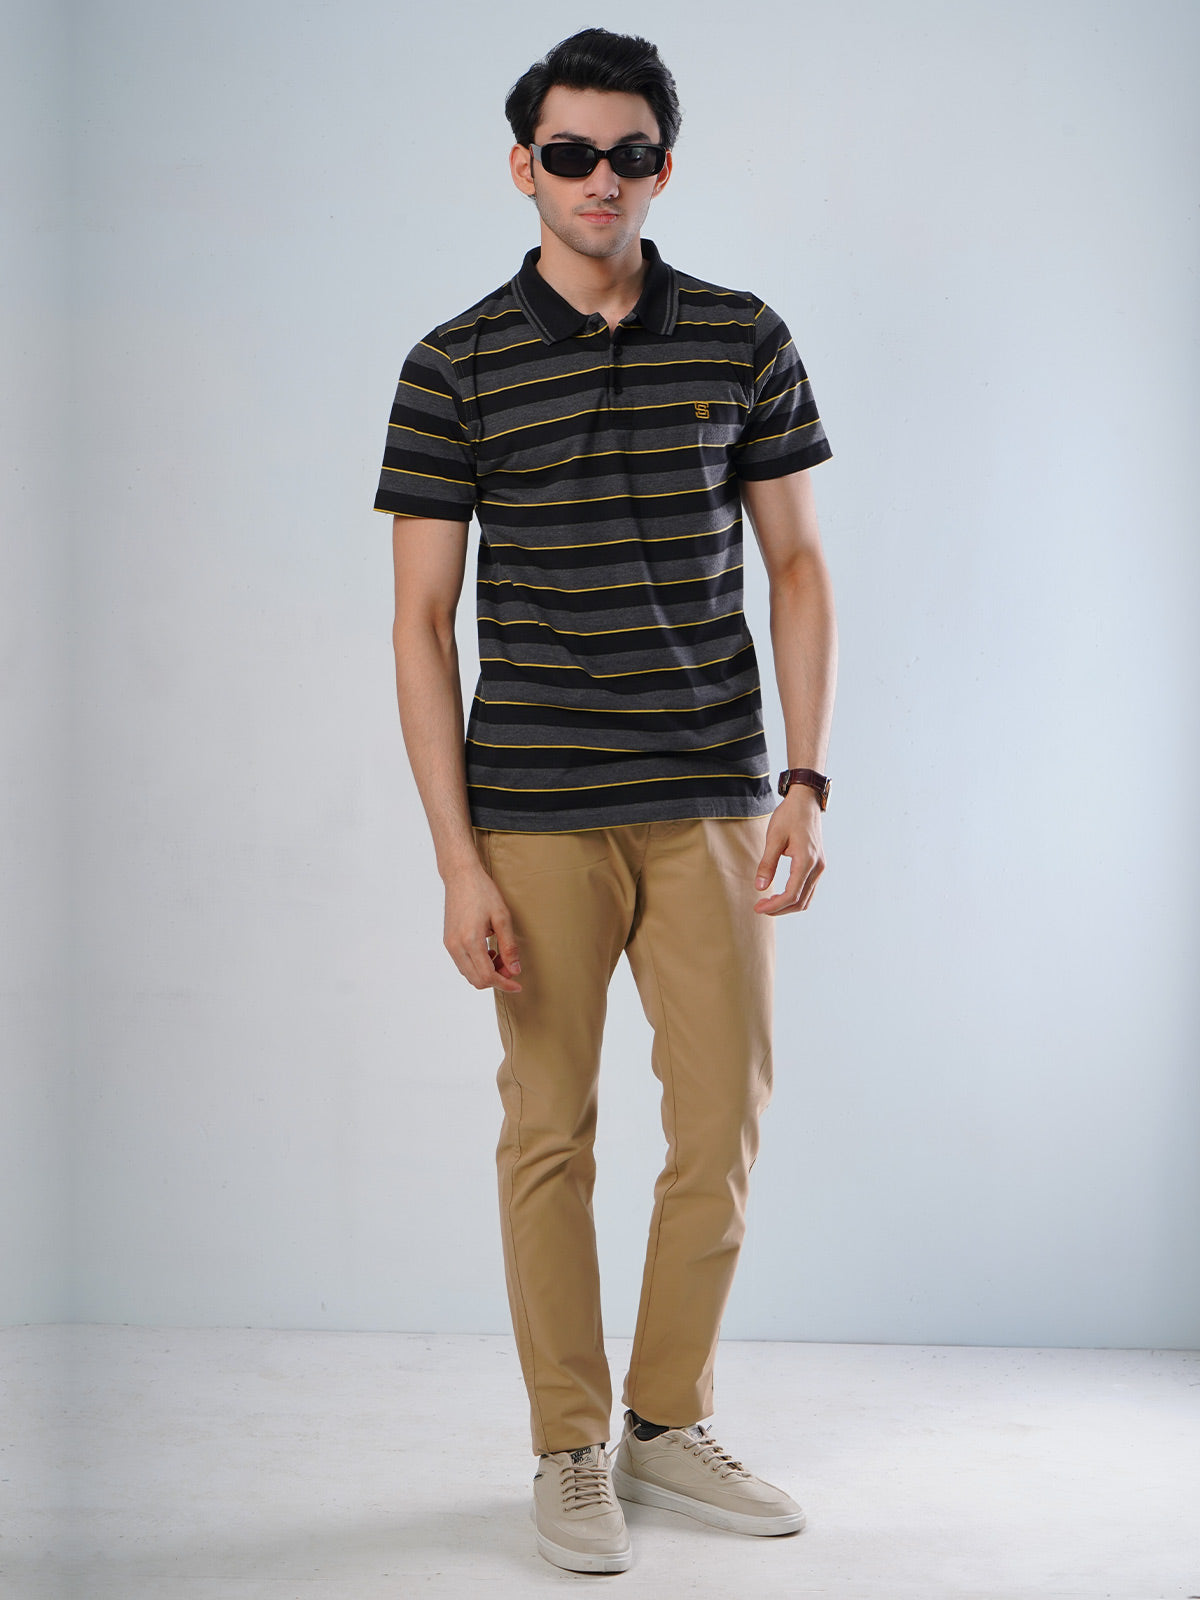 Charcoal Grey Contrast Tipping Collar Multi Color Half Sleeves Striped Polo T-Shirt (POLO-514)